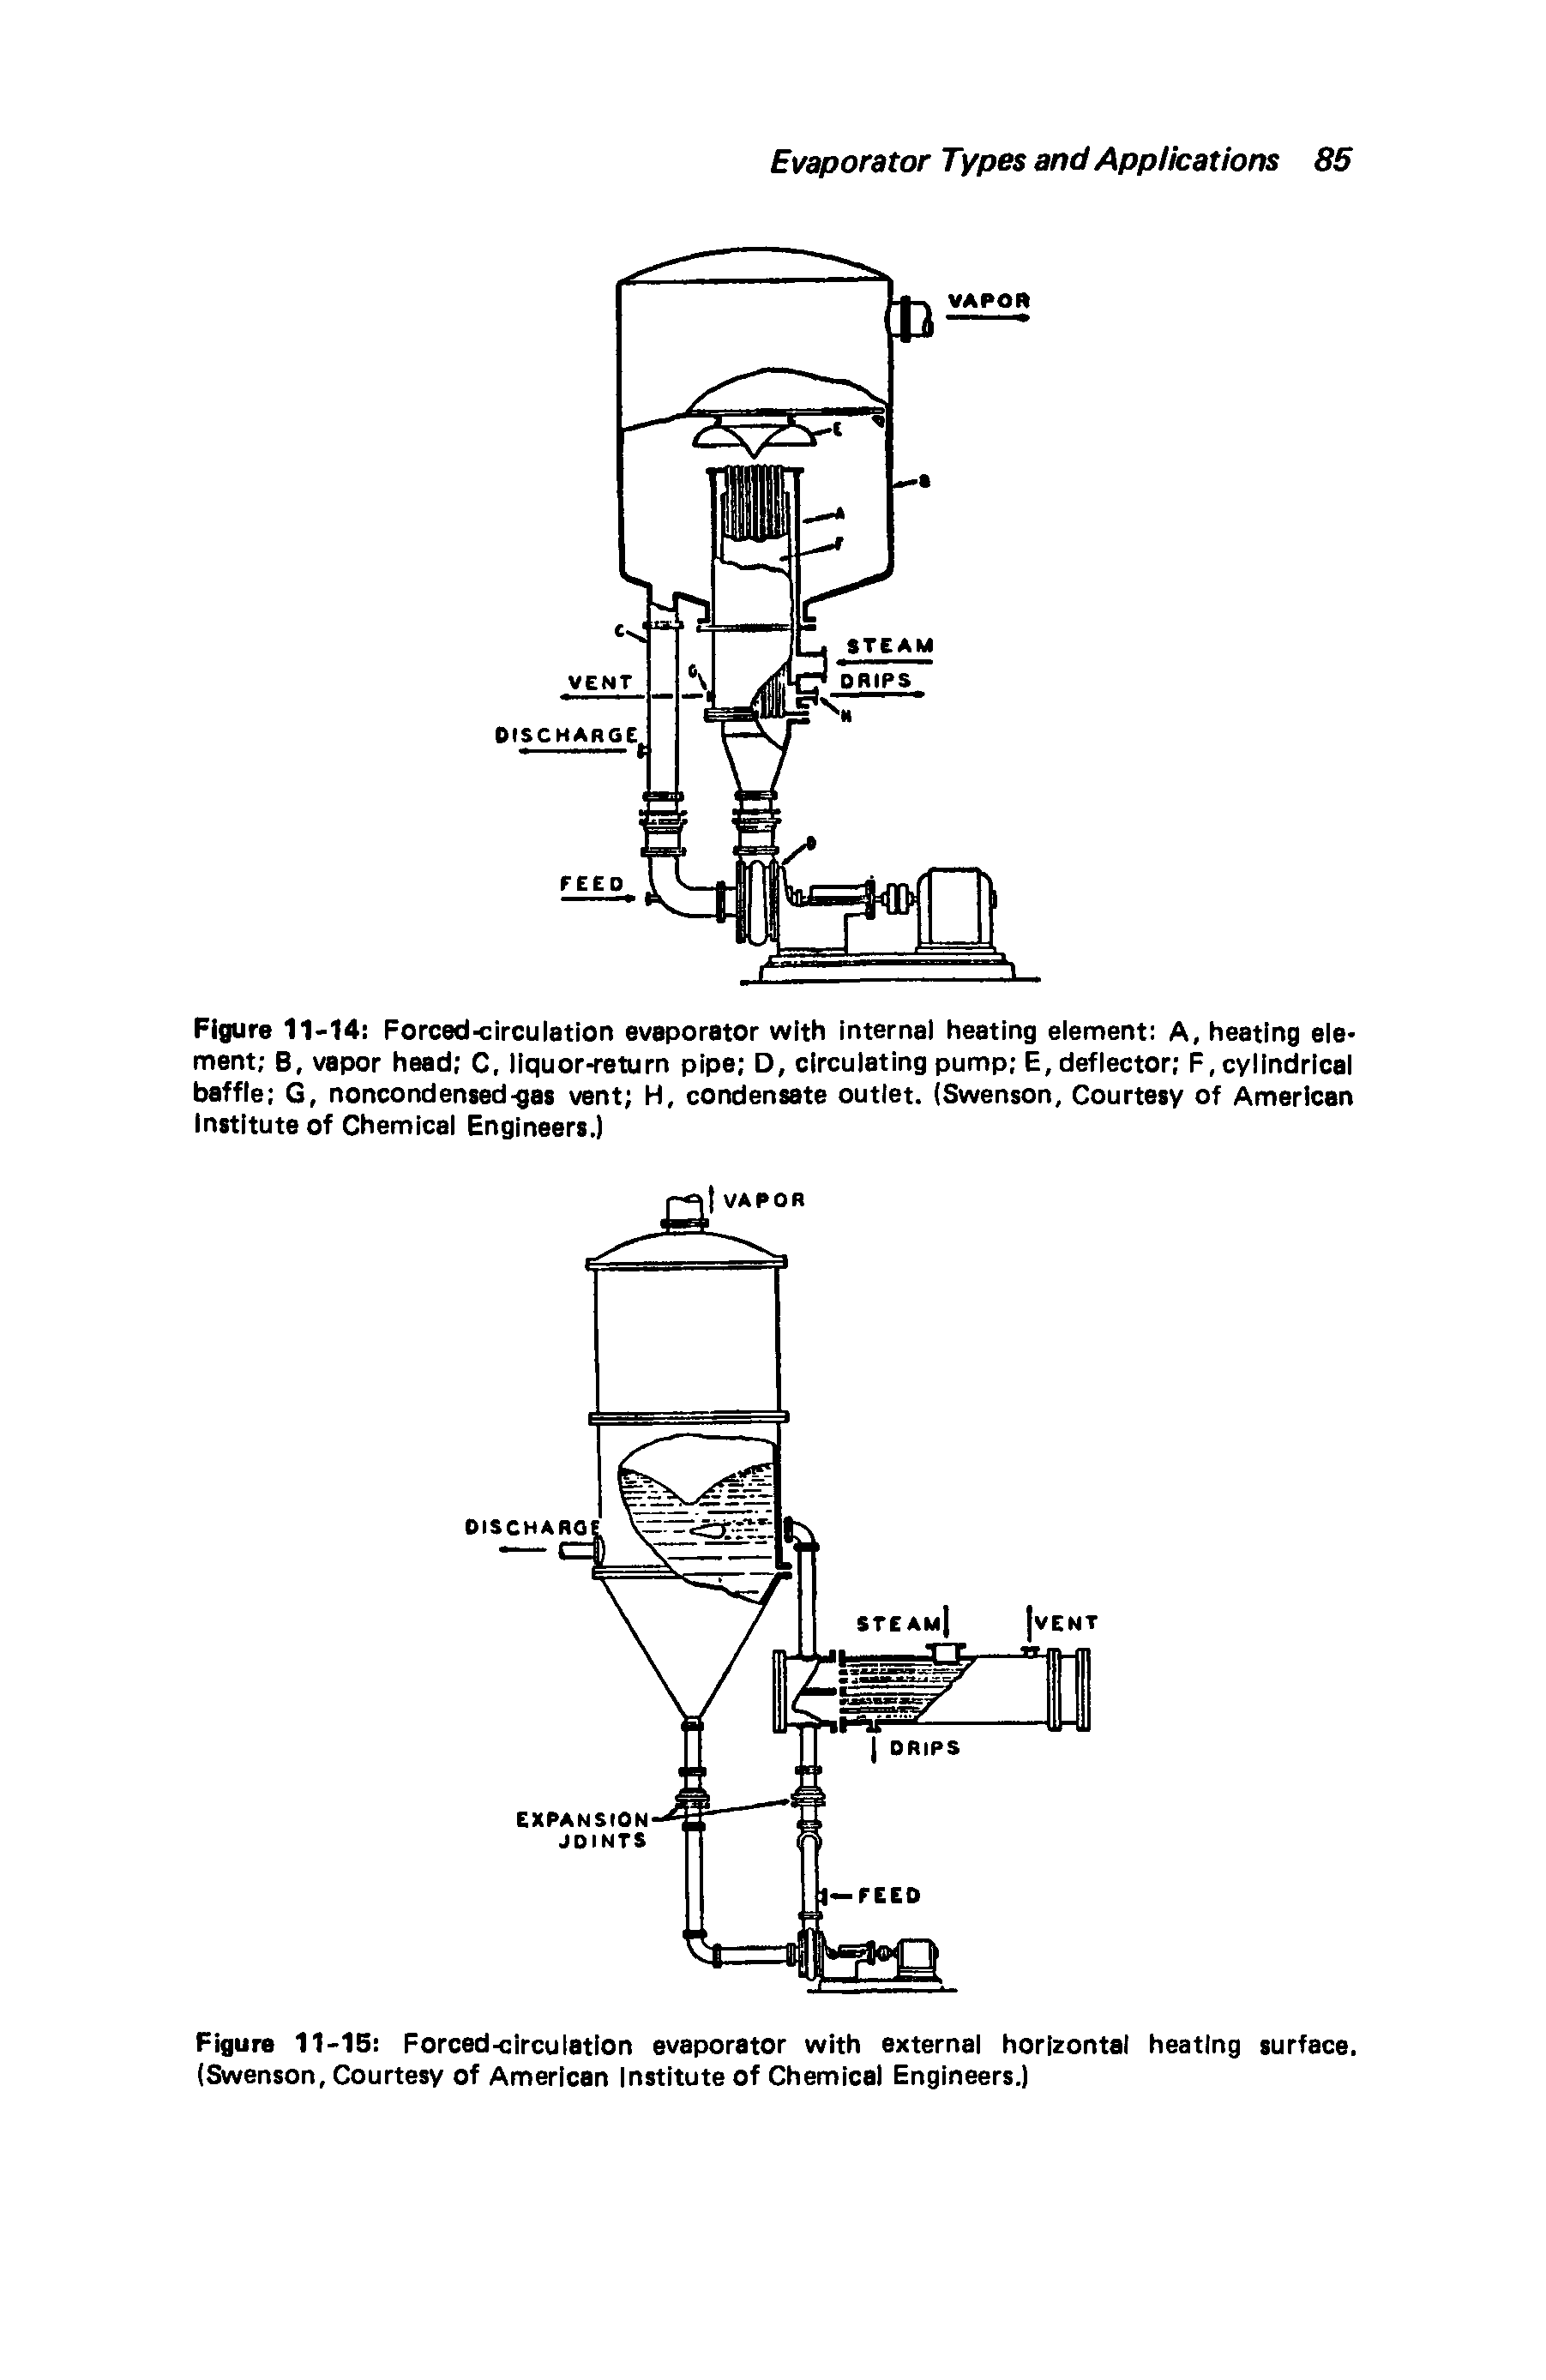 Figure 11-14 Forced-circulation evaporator with internal heating element A, heating element B, vapor head C. liquor-return pipe D, circulating pump E, deflector F, cylindrical baffle G, noncondensed-gat vent H, condensate outlet. (Swenson, Courtesy of American institute of Chemical Engineers.)...